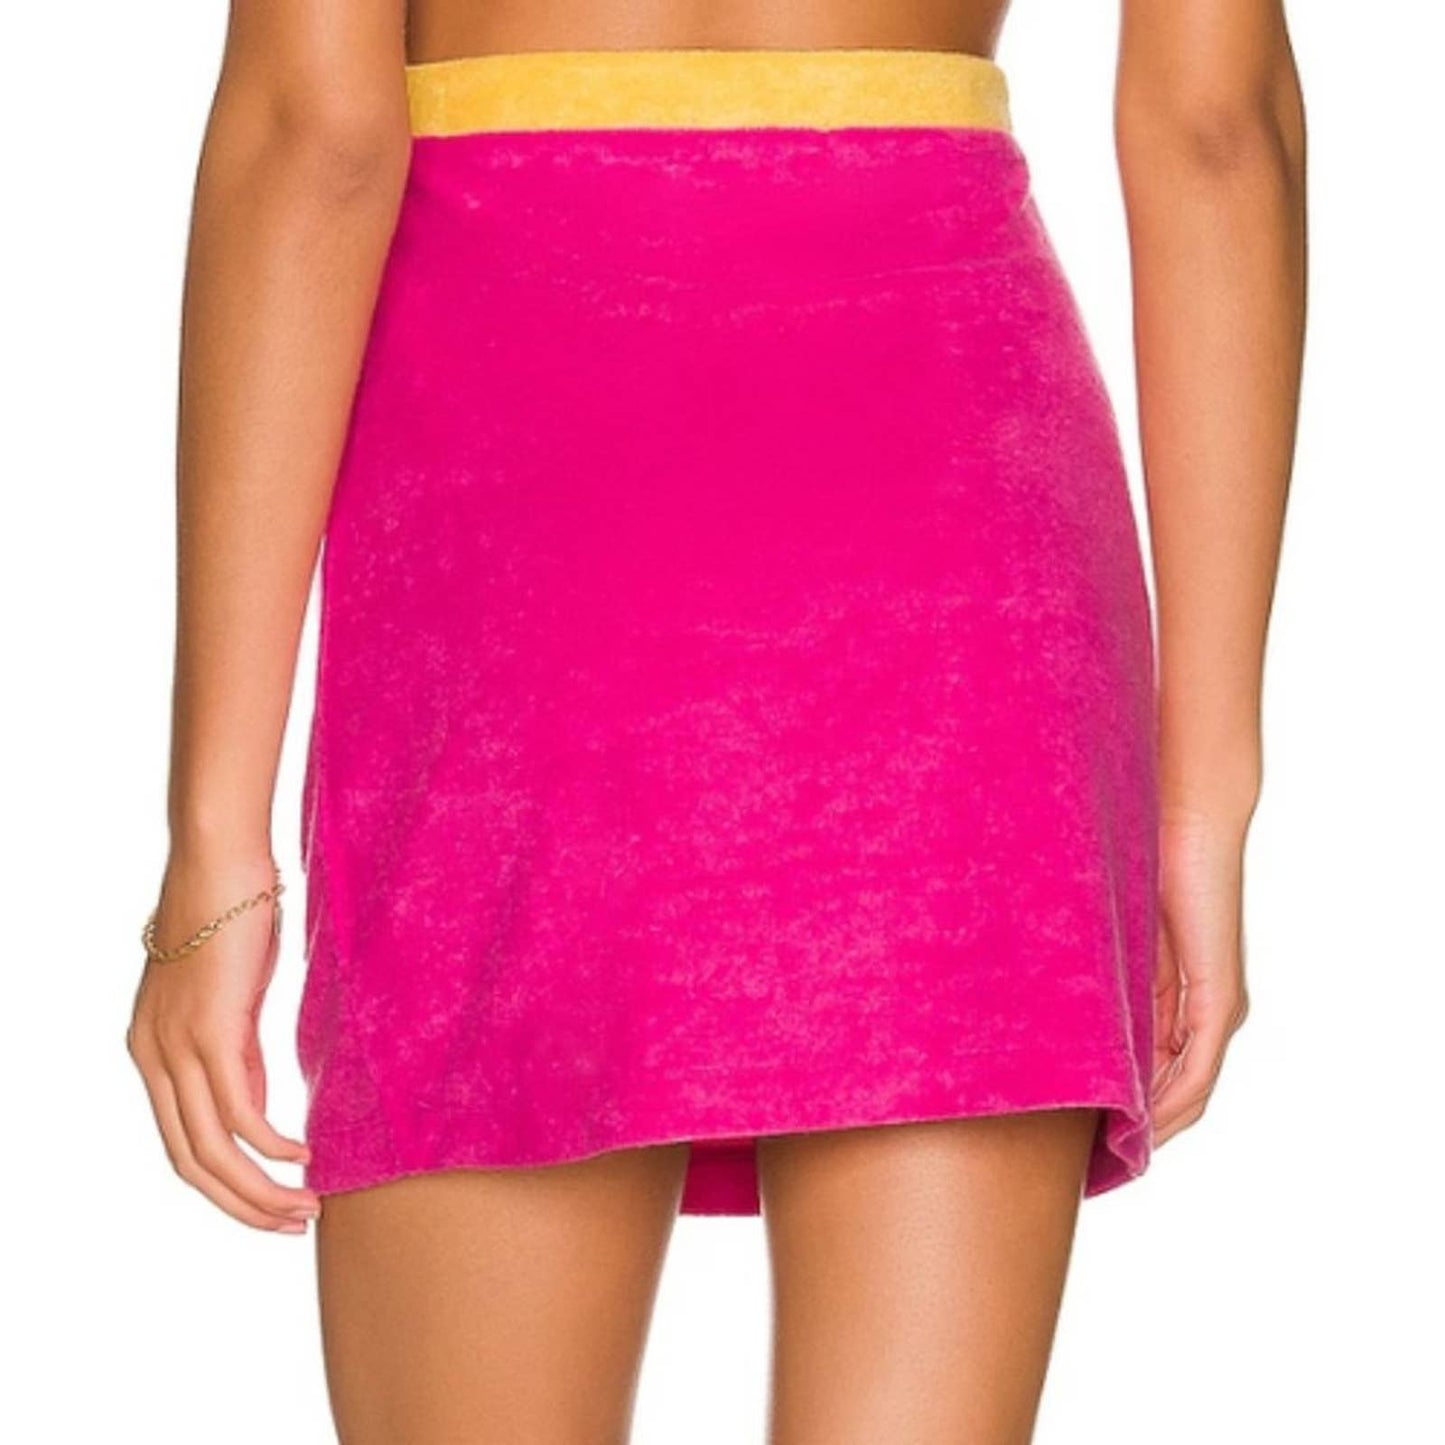 Lovers and Friends Lana Mini Skirt in Pink Terry Yellow Waist NWT Size Small